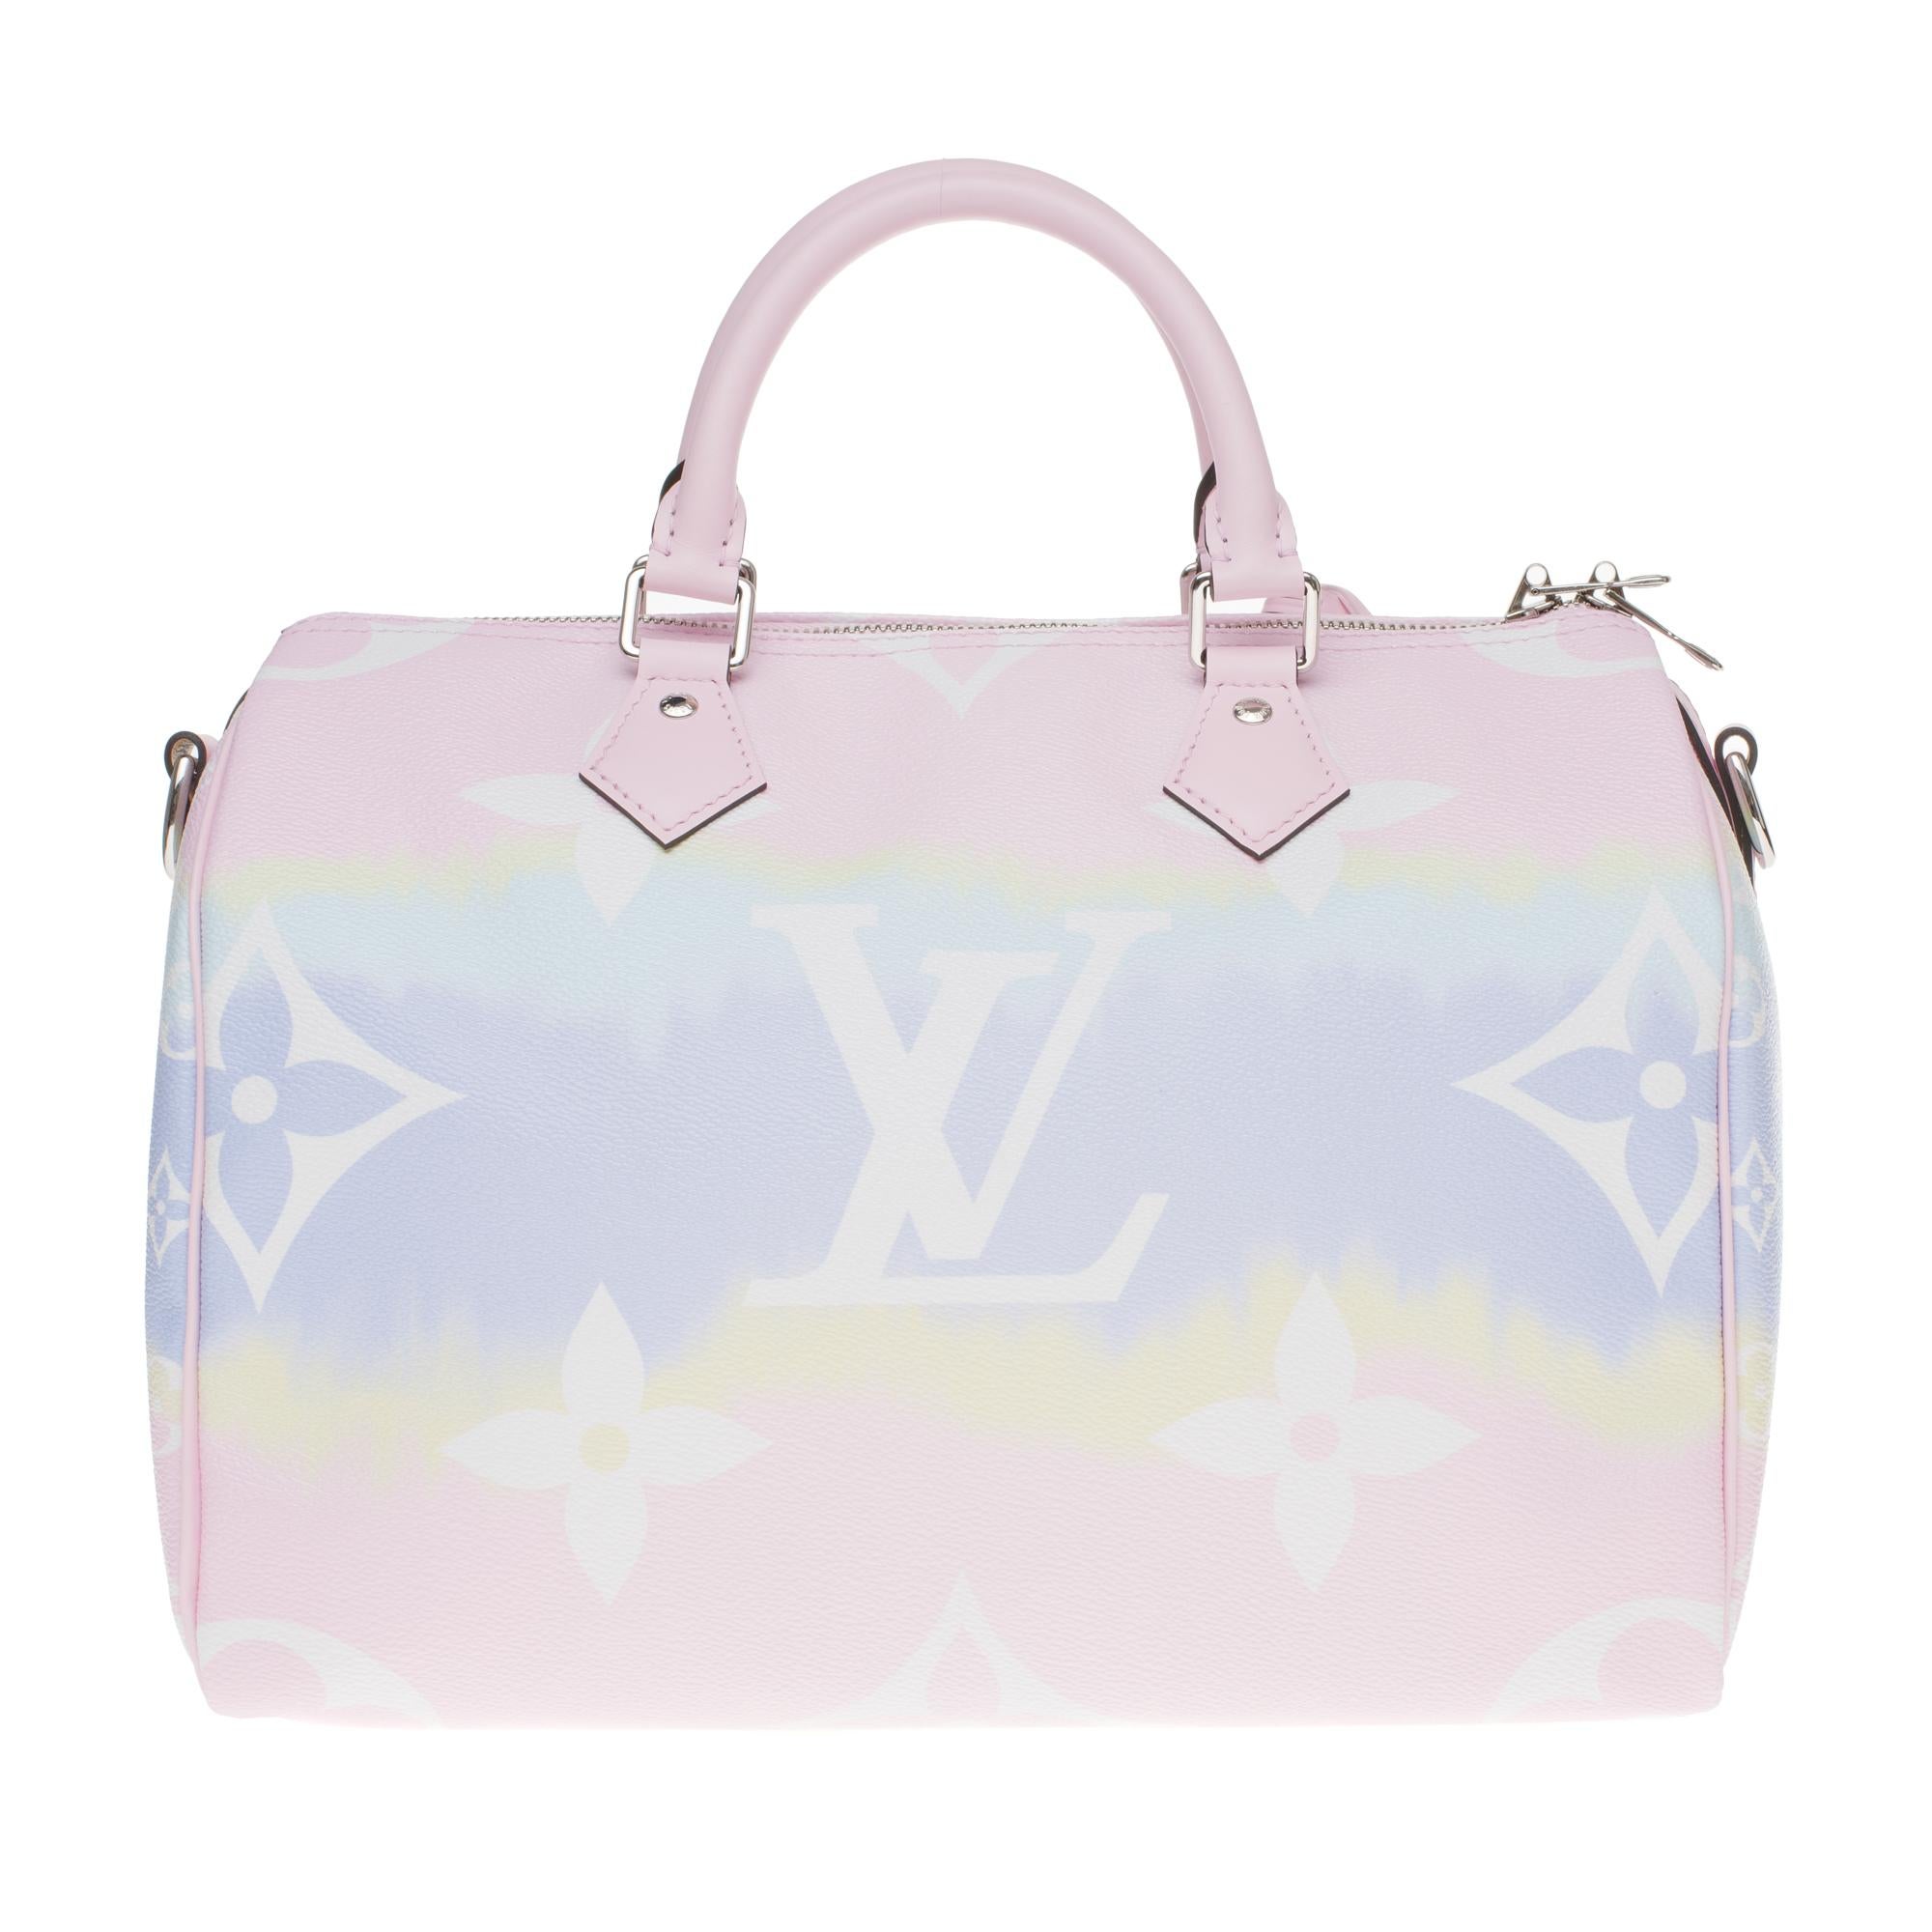 The Monogram Tie & Dye canvas gives this Speedy Shoulder 30 a summer look. This classic Louis Vuitton urban model is revisited for the summer LV Escale capsule collection, but it remains recognizable thanks to the leather-wrapped handles and its